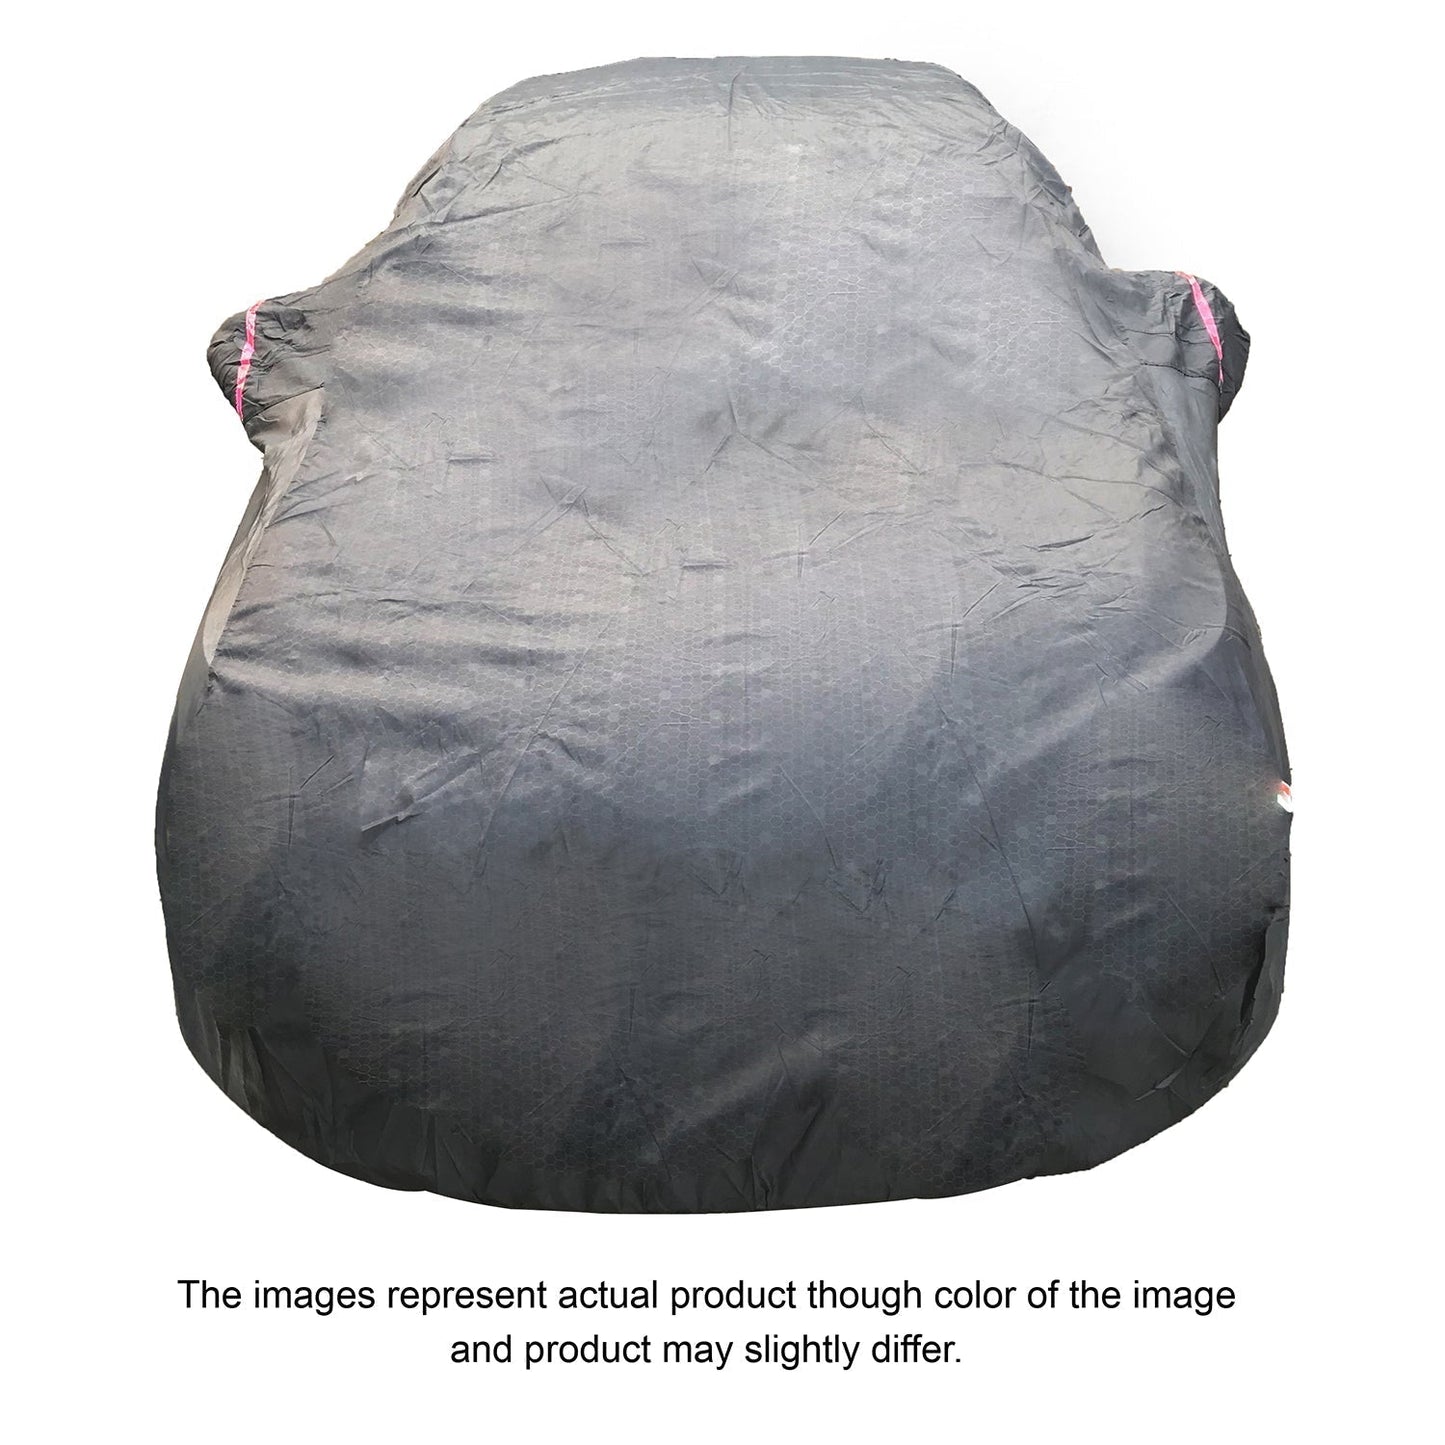 Oshotto 100% Dust Proof, Water Resistant Grey Car Body Cover with Mirror Pocket For Ford New Endeavour